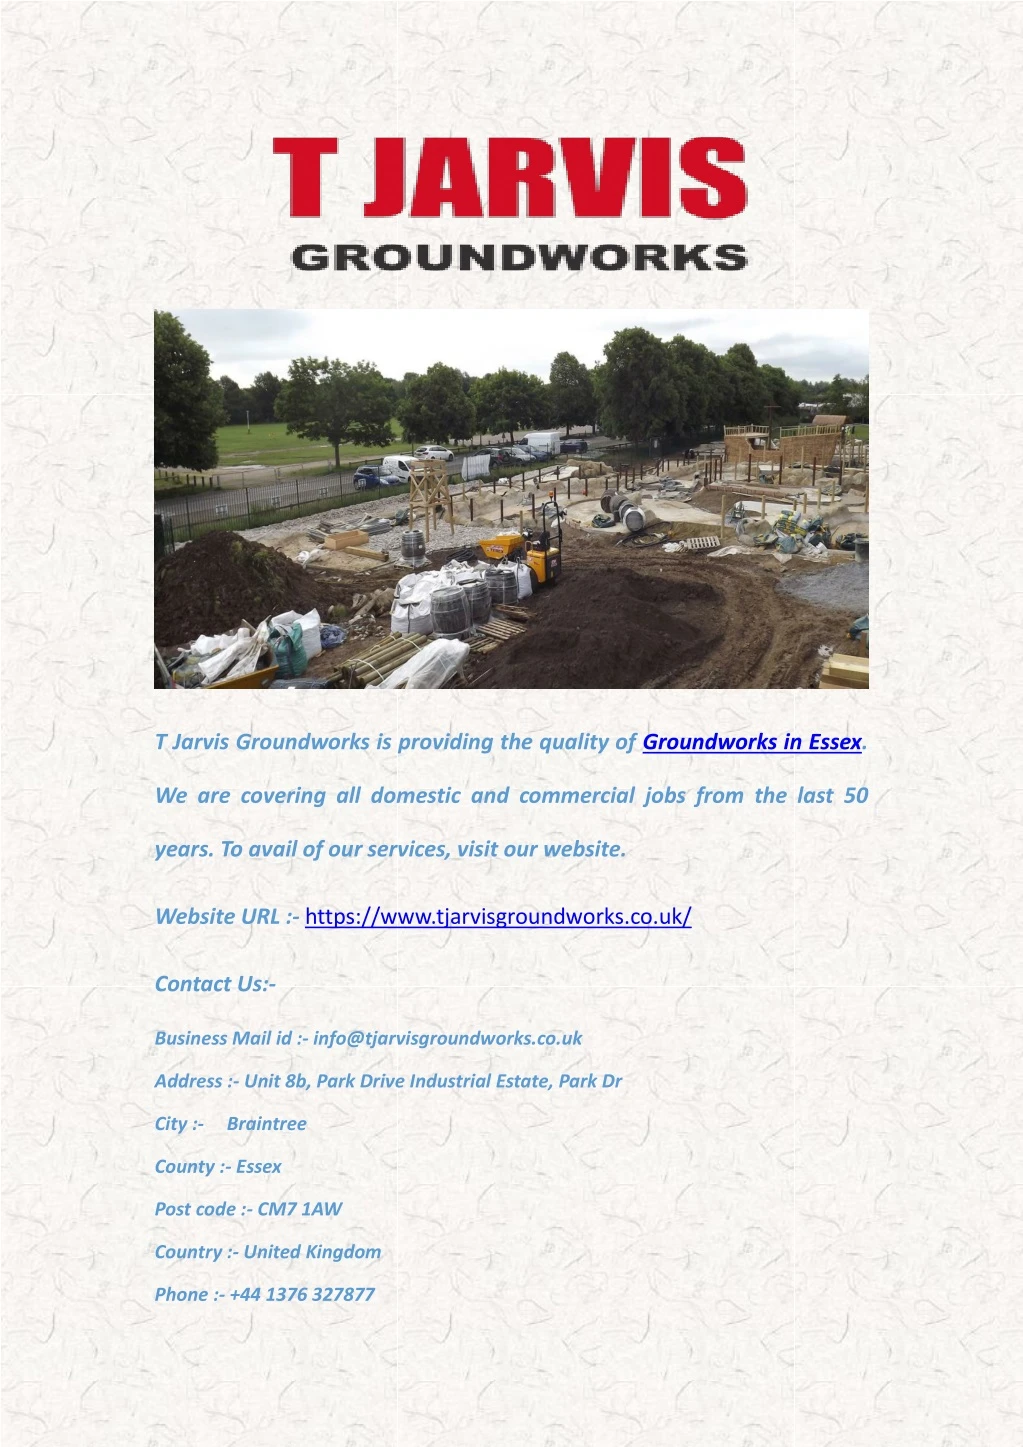 t jarvis groundworks is providing the quality